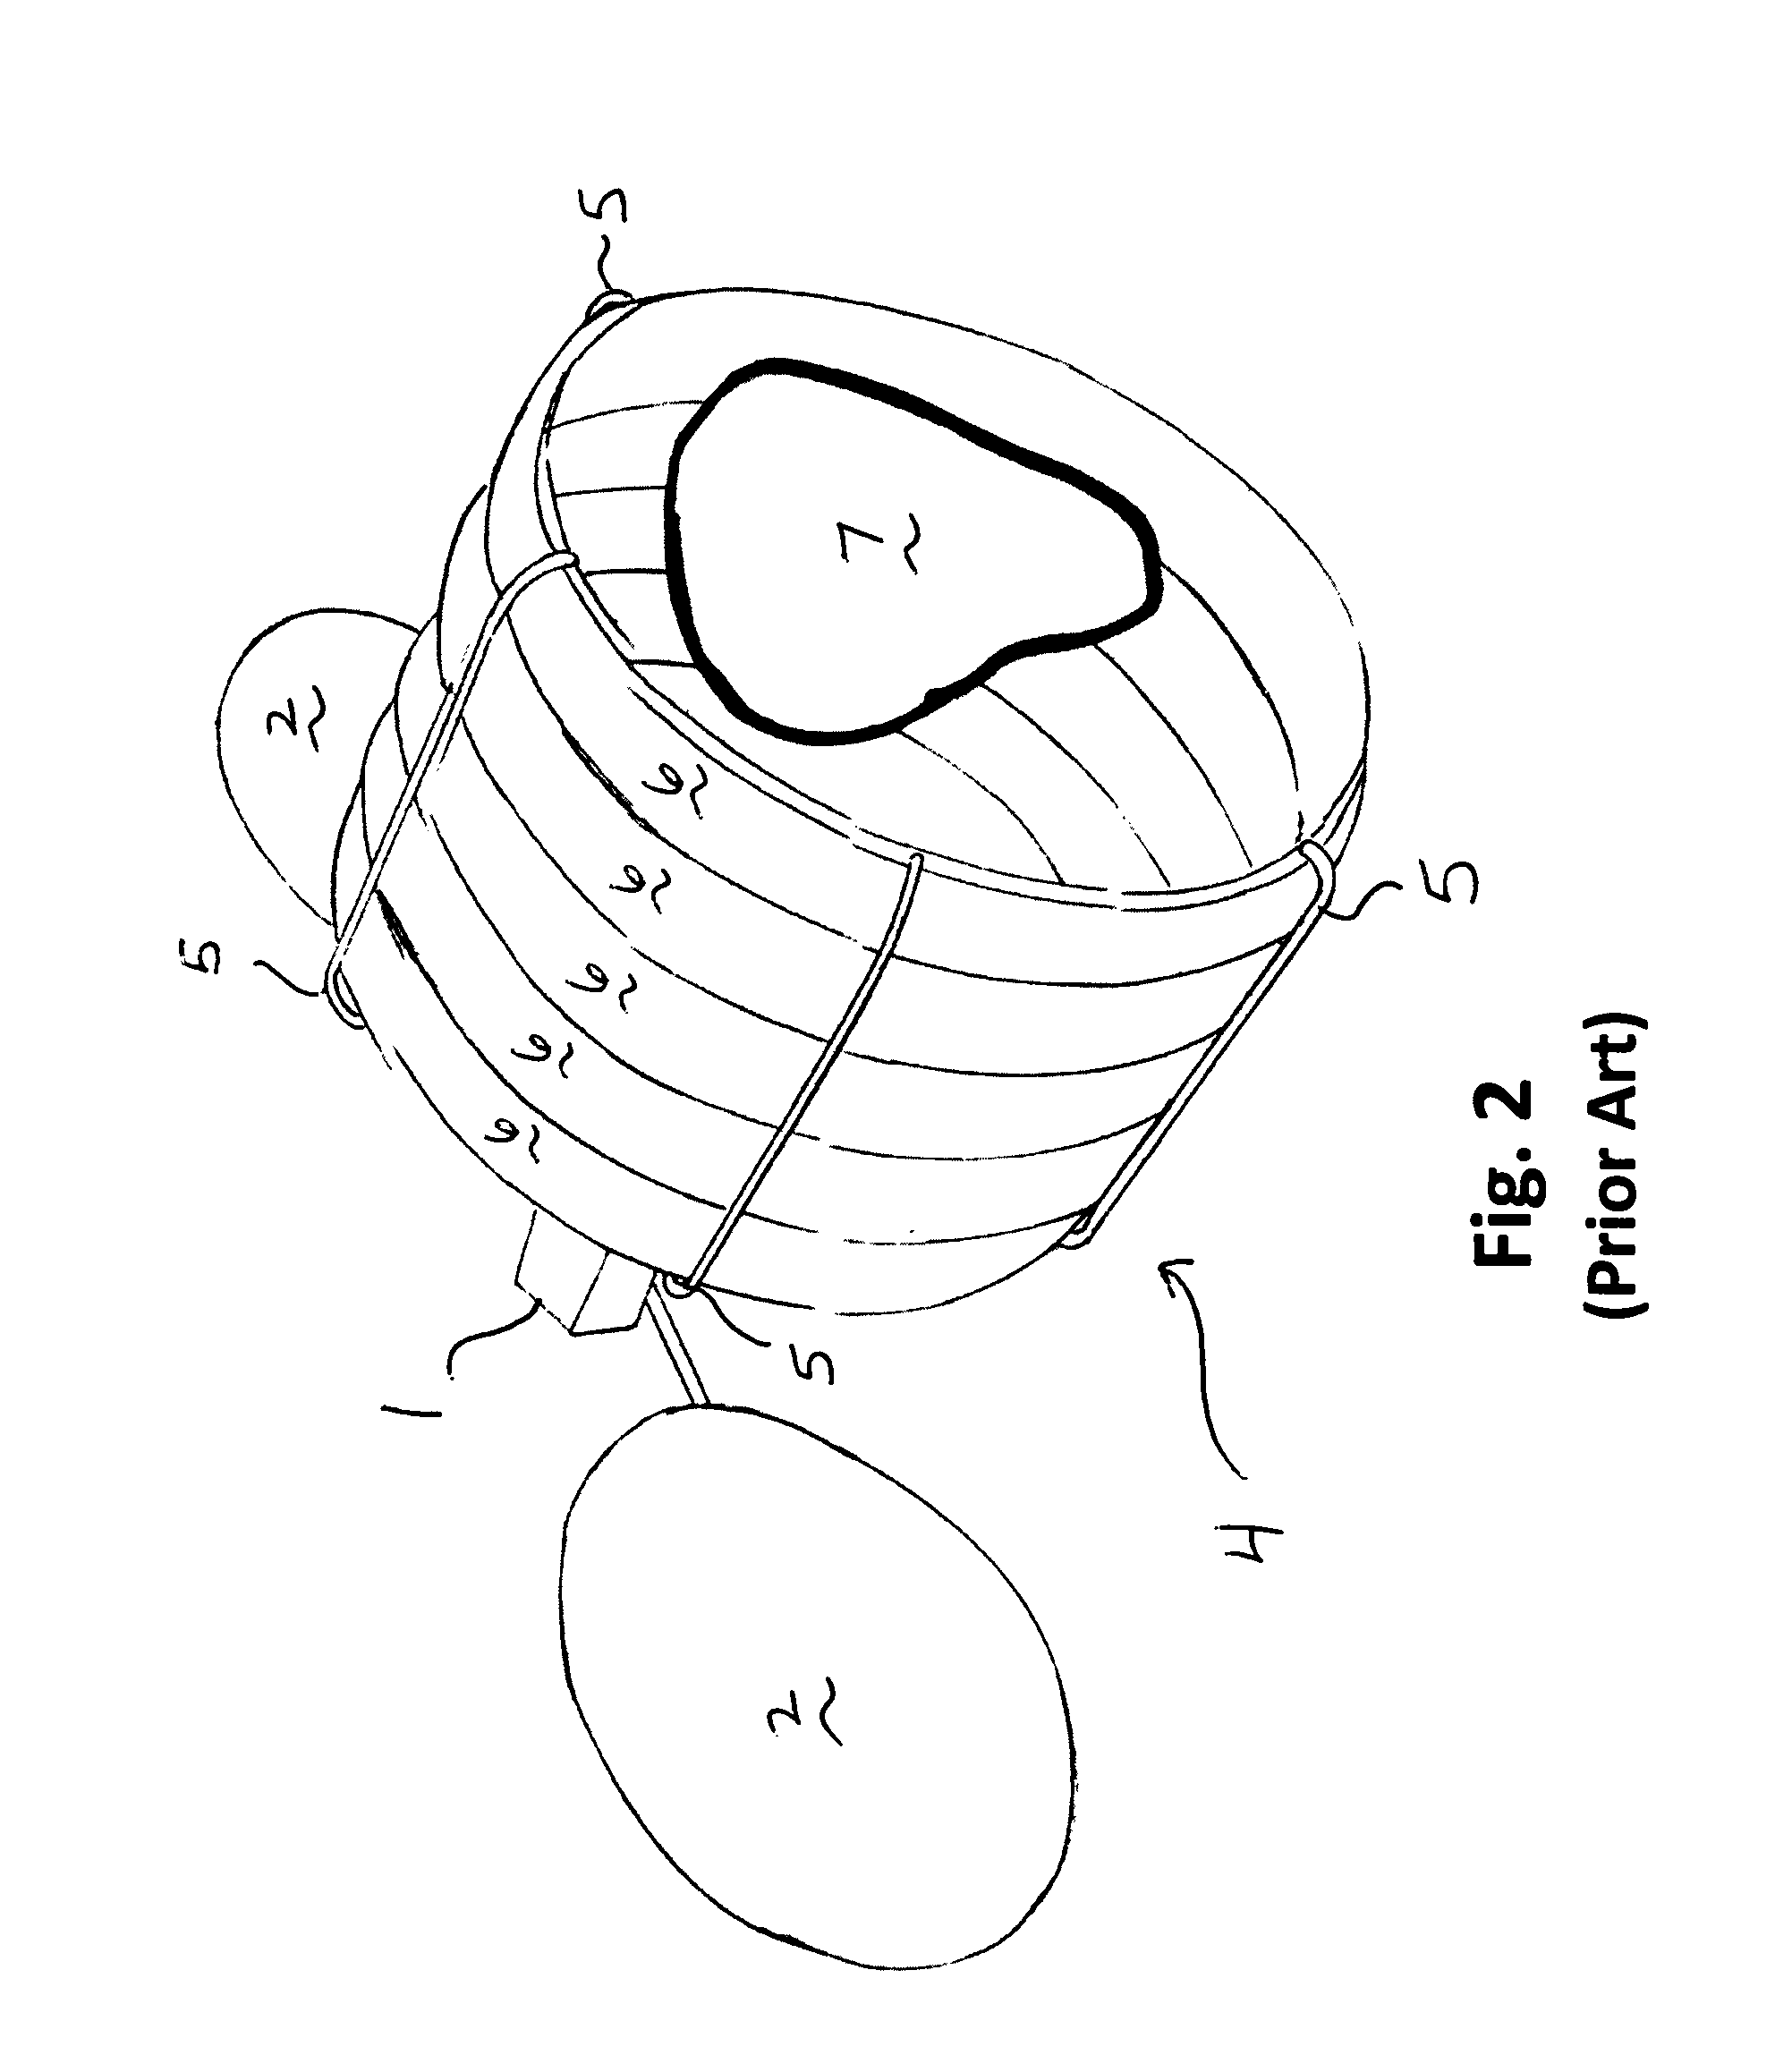 Stretch skin receptacle for space object capture and release